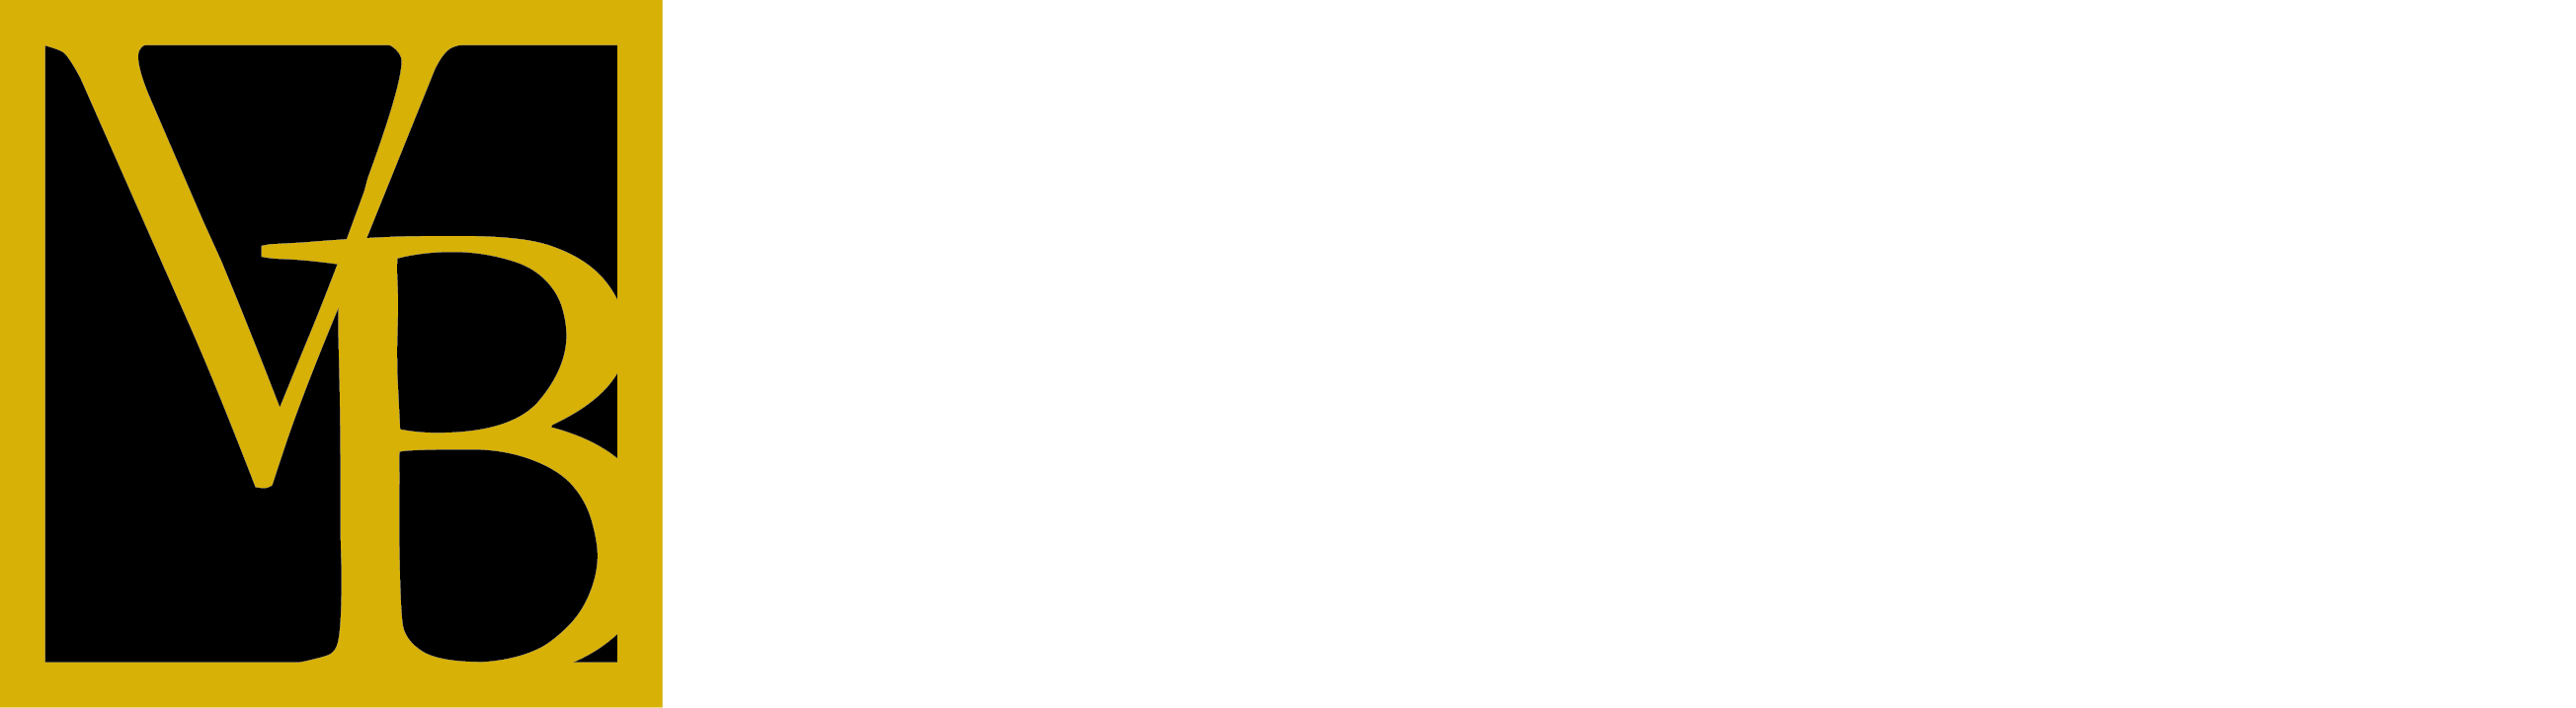 Vance Brothers Construction